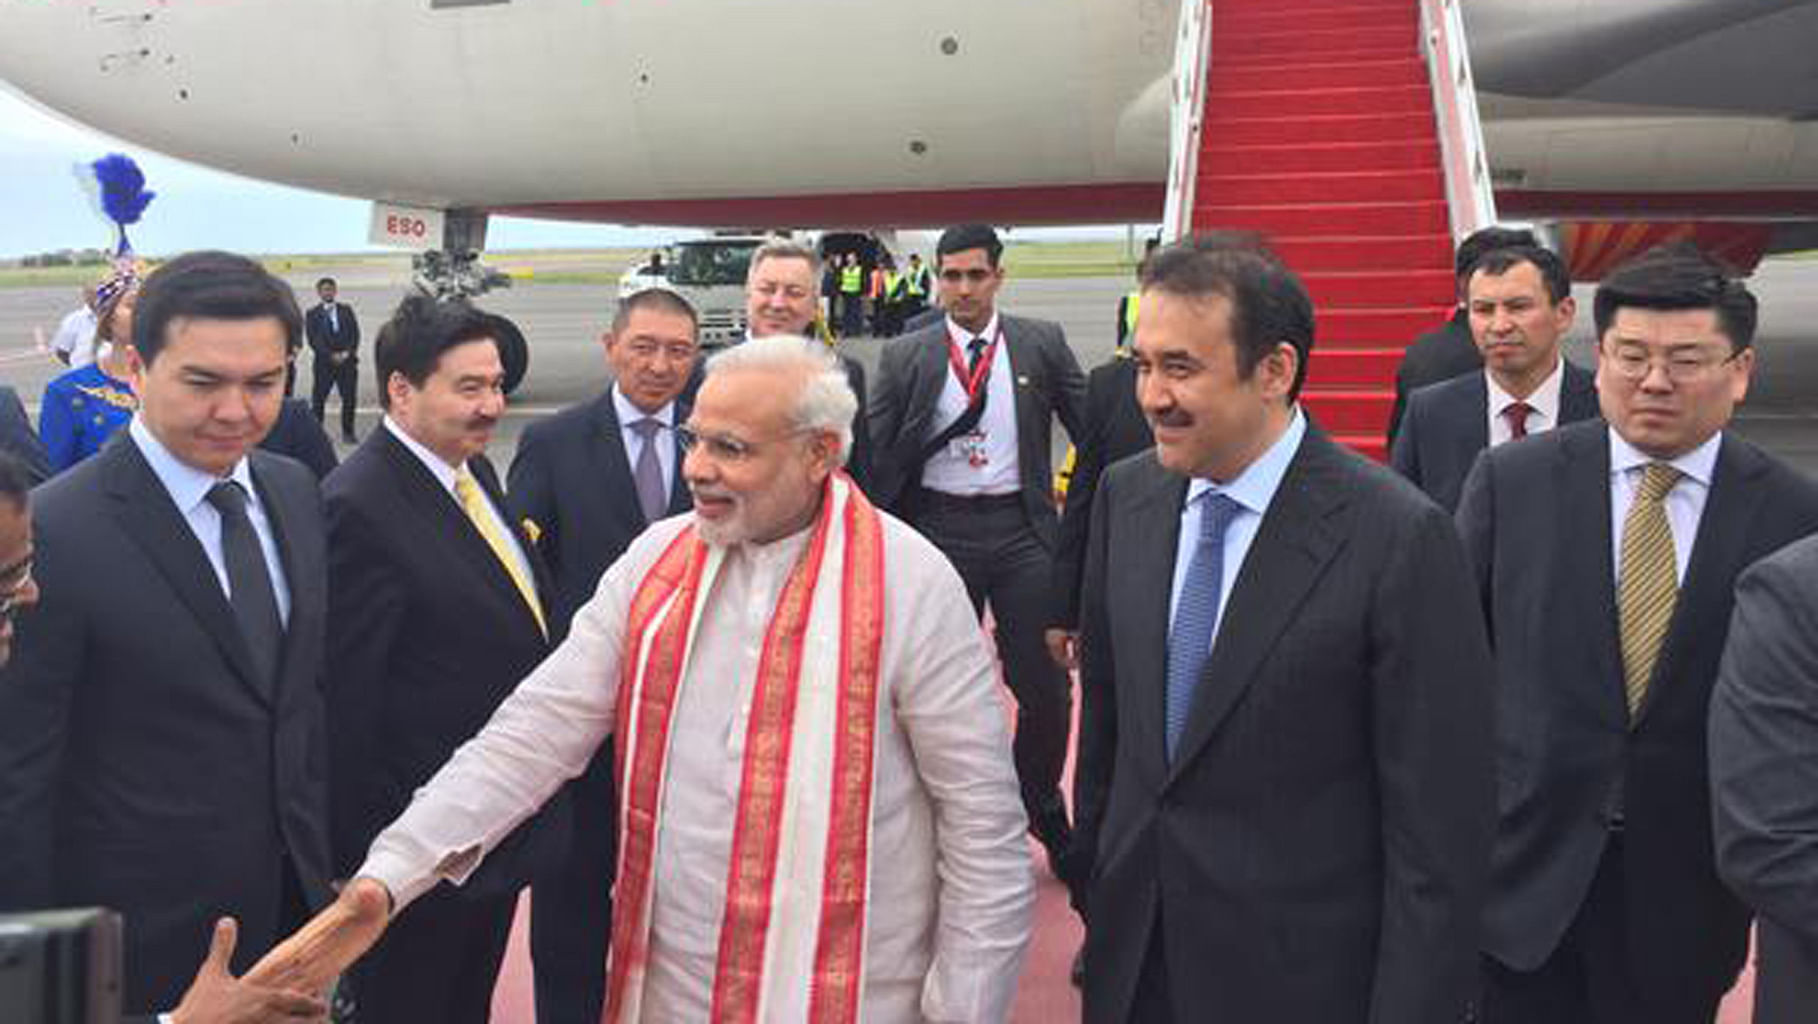 Prime Minister Narendra Modi alights from the aircraft&nbsp;in Kazakhstan. (Photo Courtesy: <a href="https://twitter.com/narendramodi">Twitter.com/narendramodi</a>)